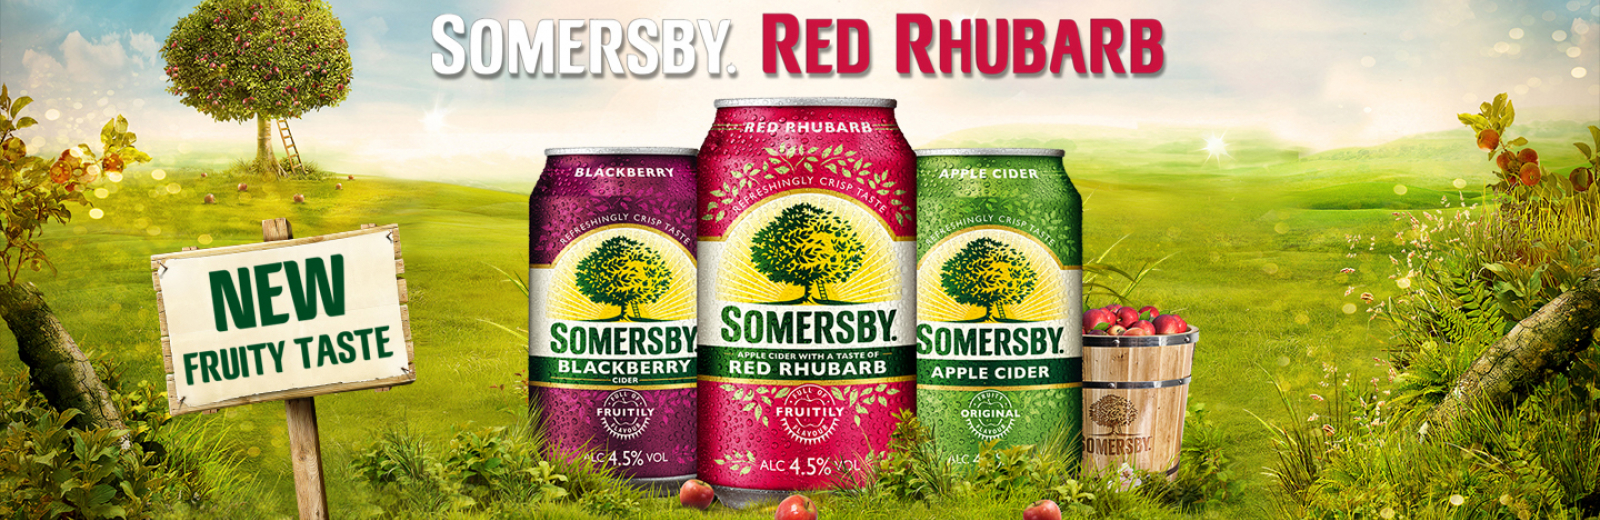 Somersby banner